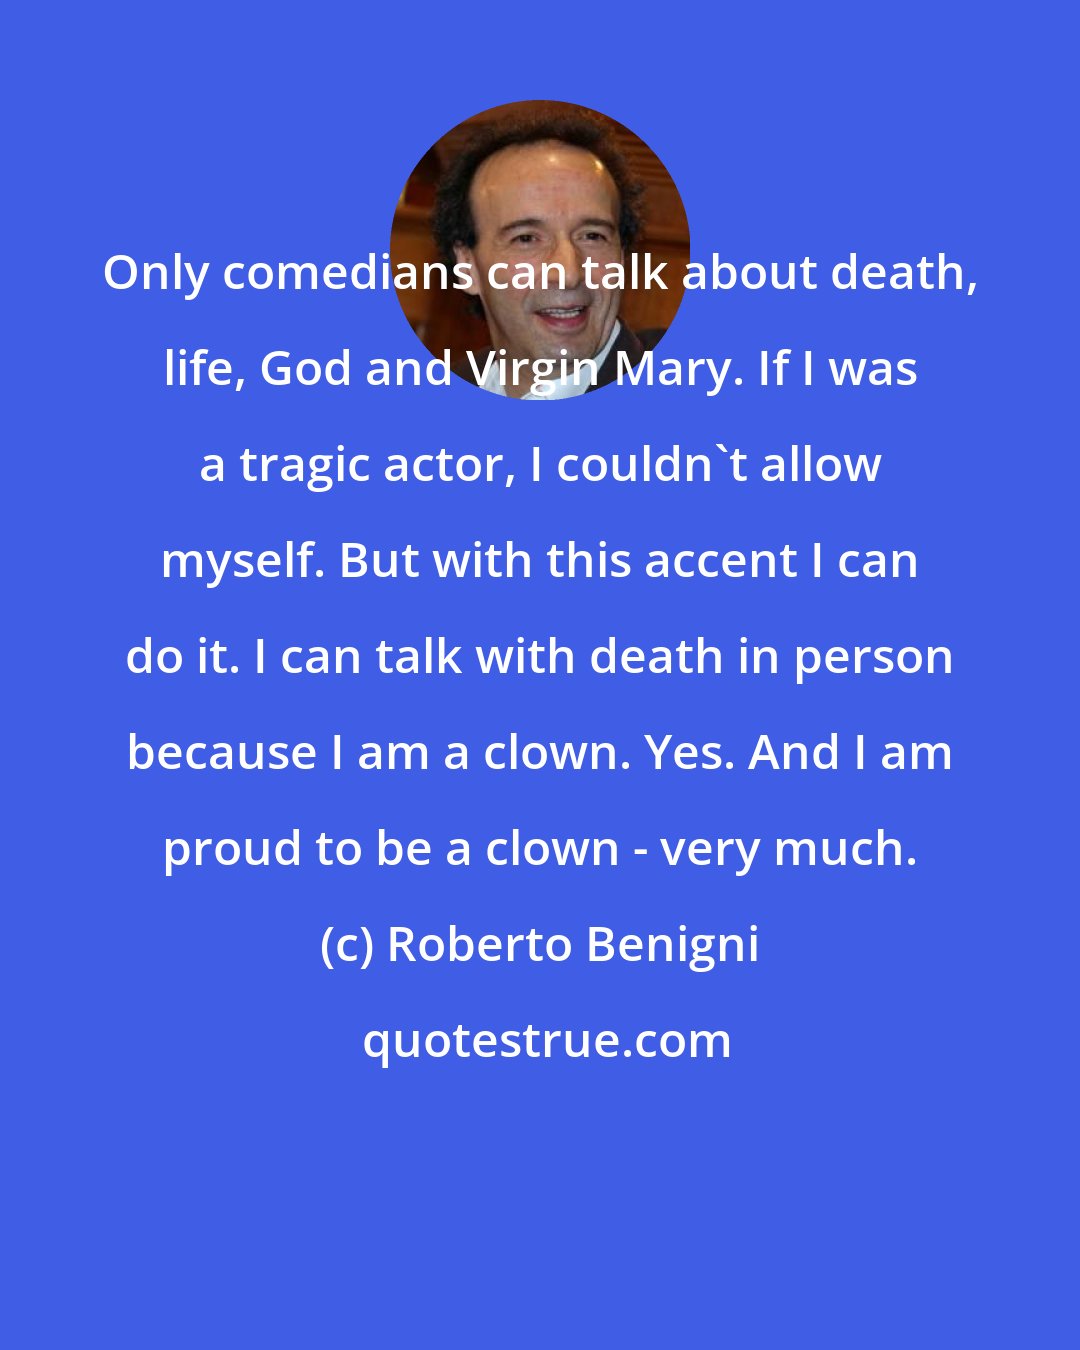 Roberto Benigni: Only comedians can talk about death, life, God and Virgin Mary. If I was a tragic actor, I couldn't allow myself. But with this accent I can do it. I can talk with death in person because I am a clown. Yes. And I am proud to be a clown - very much.